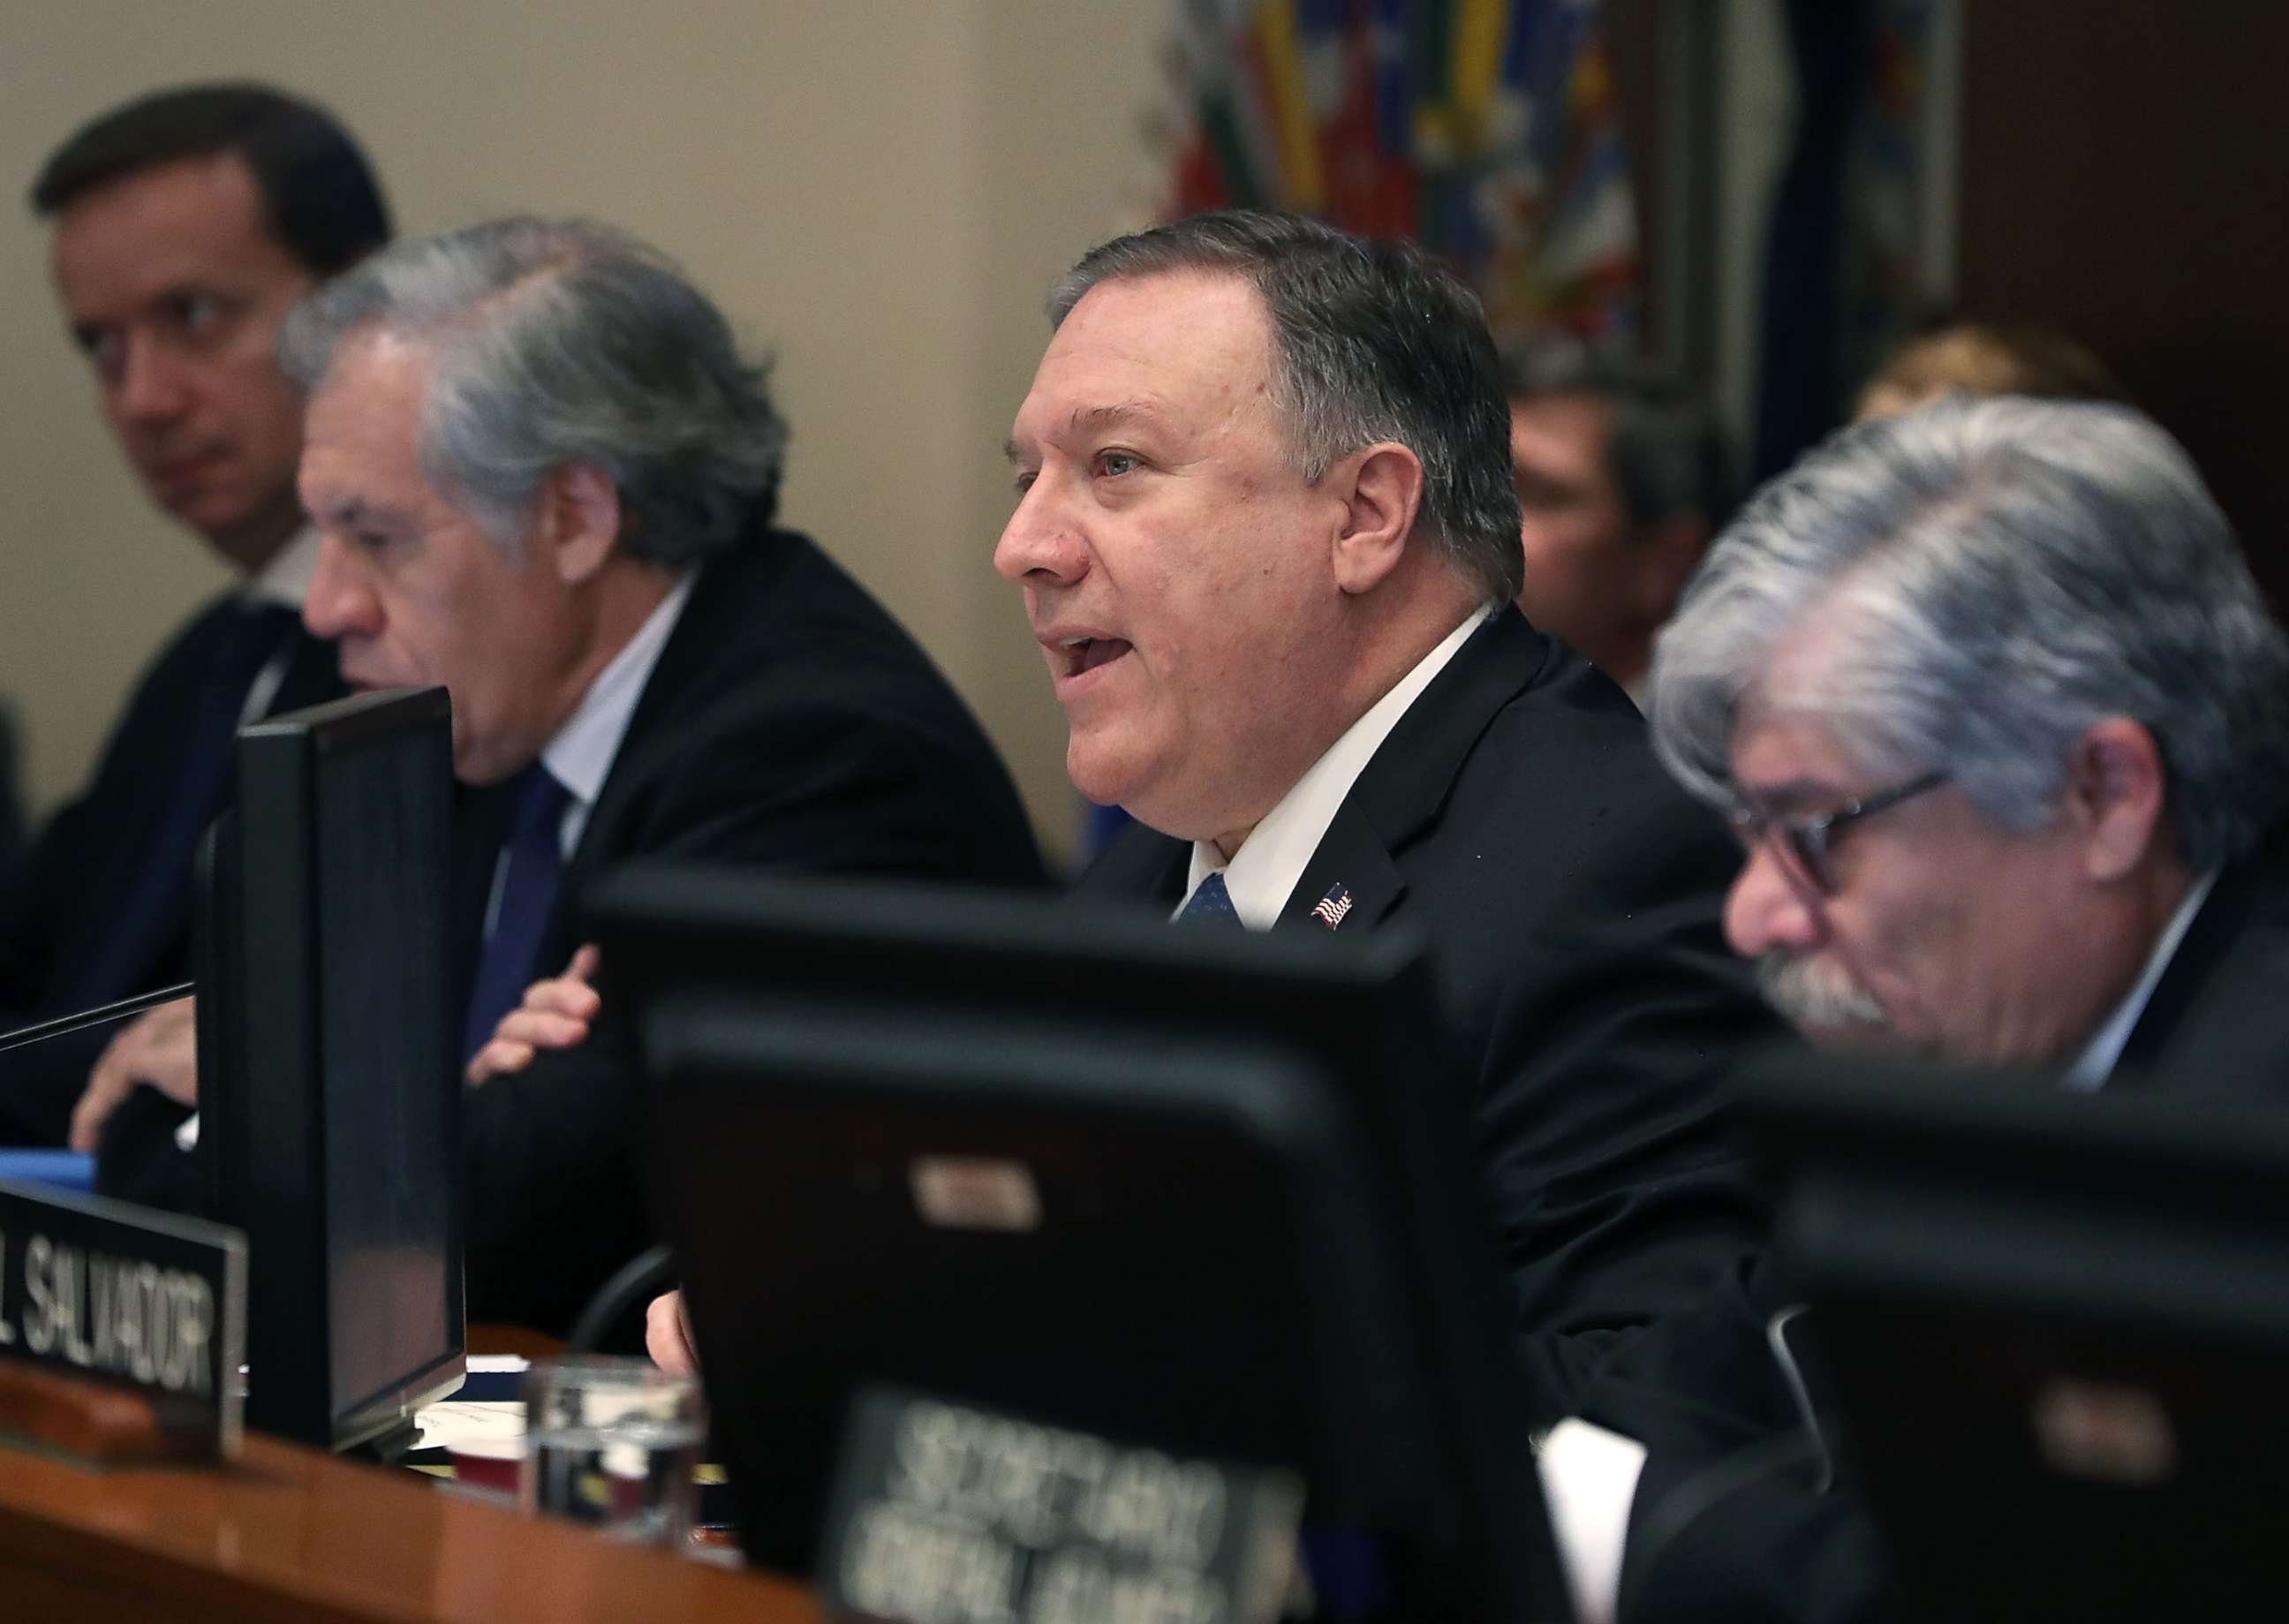 PHOTO: Secretary of State Mike Pompeo, center, speaks during a meeting of the Permanent Council of the Organization of American States (OAS), Jan. 24, 2019 in Washington, D.C.